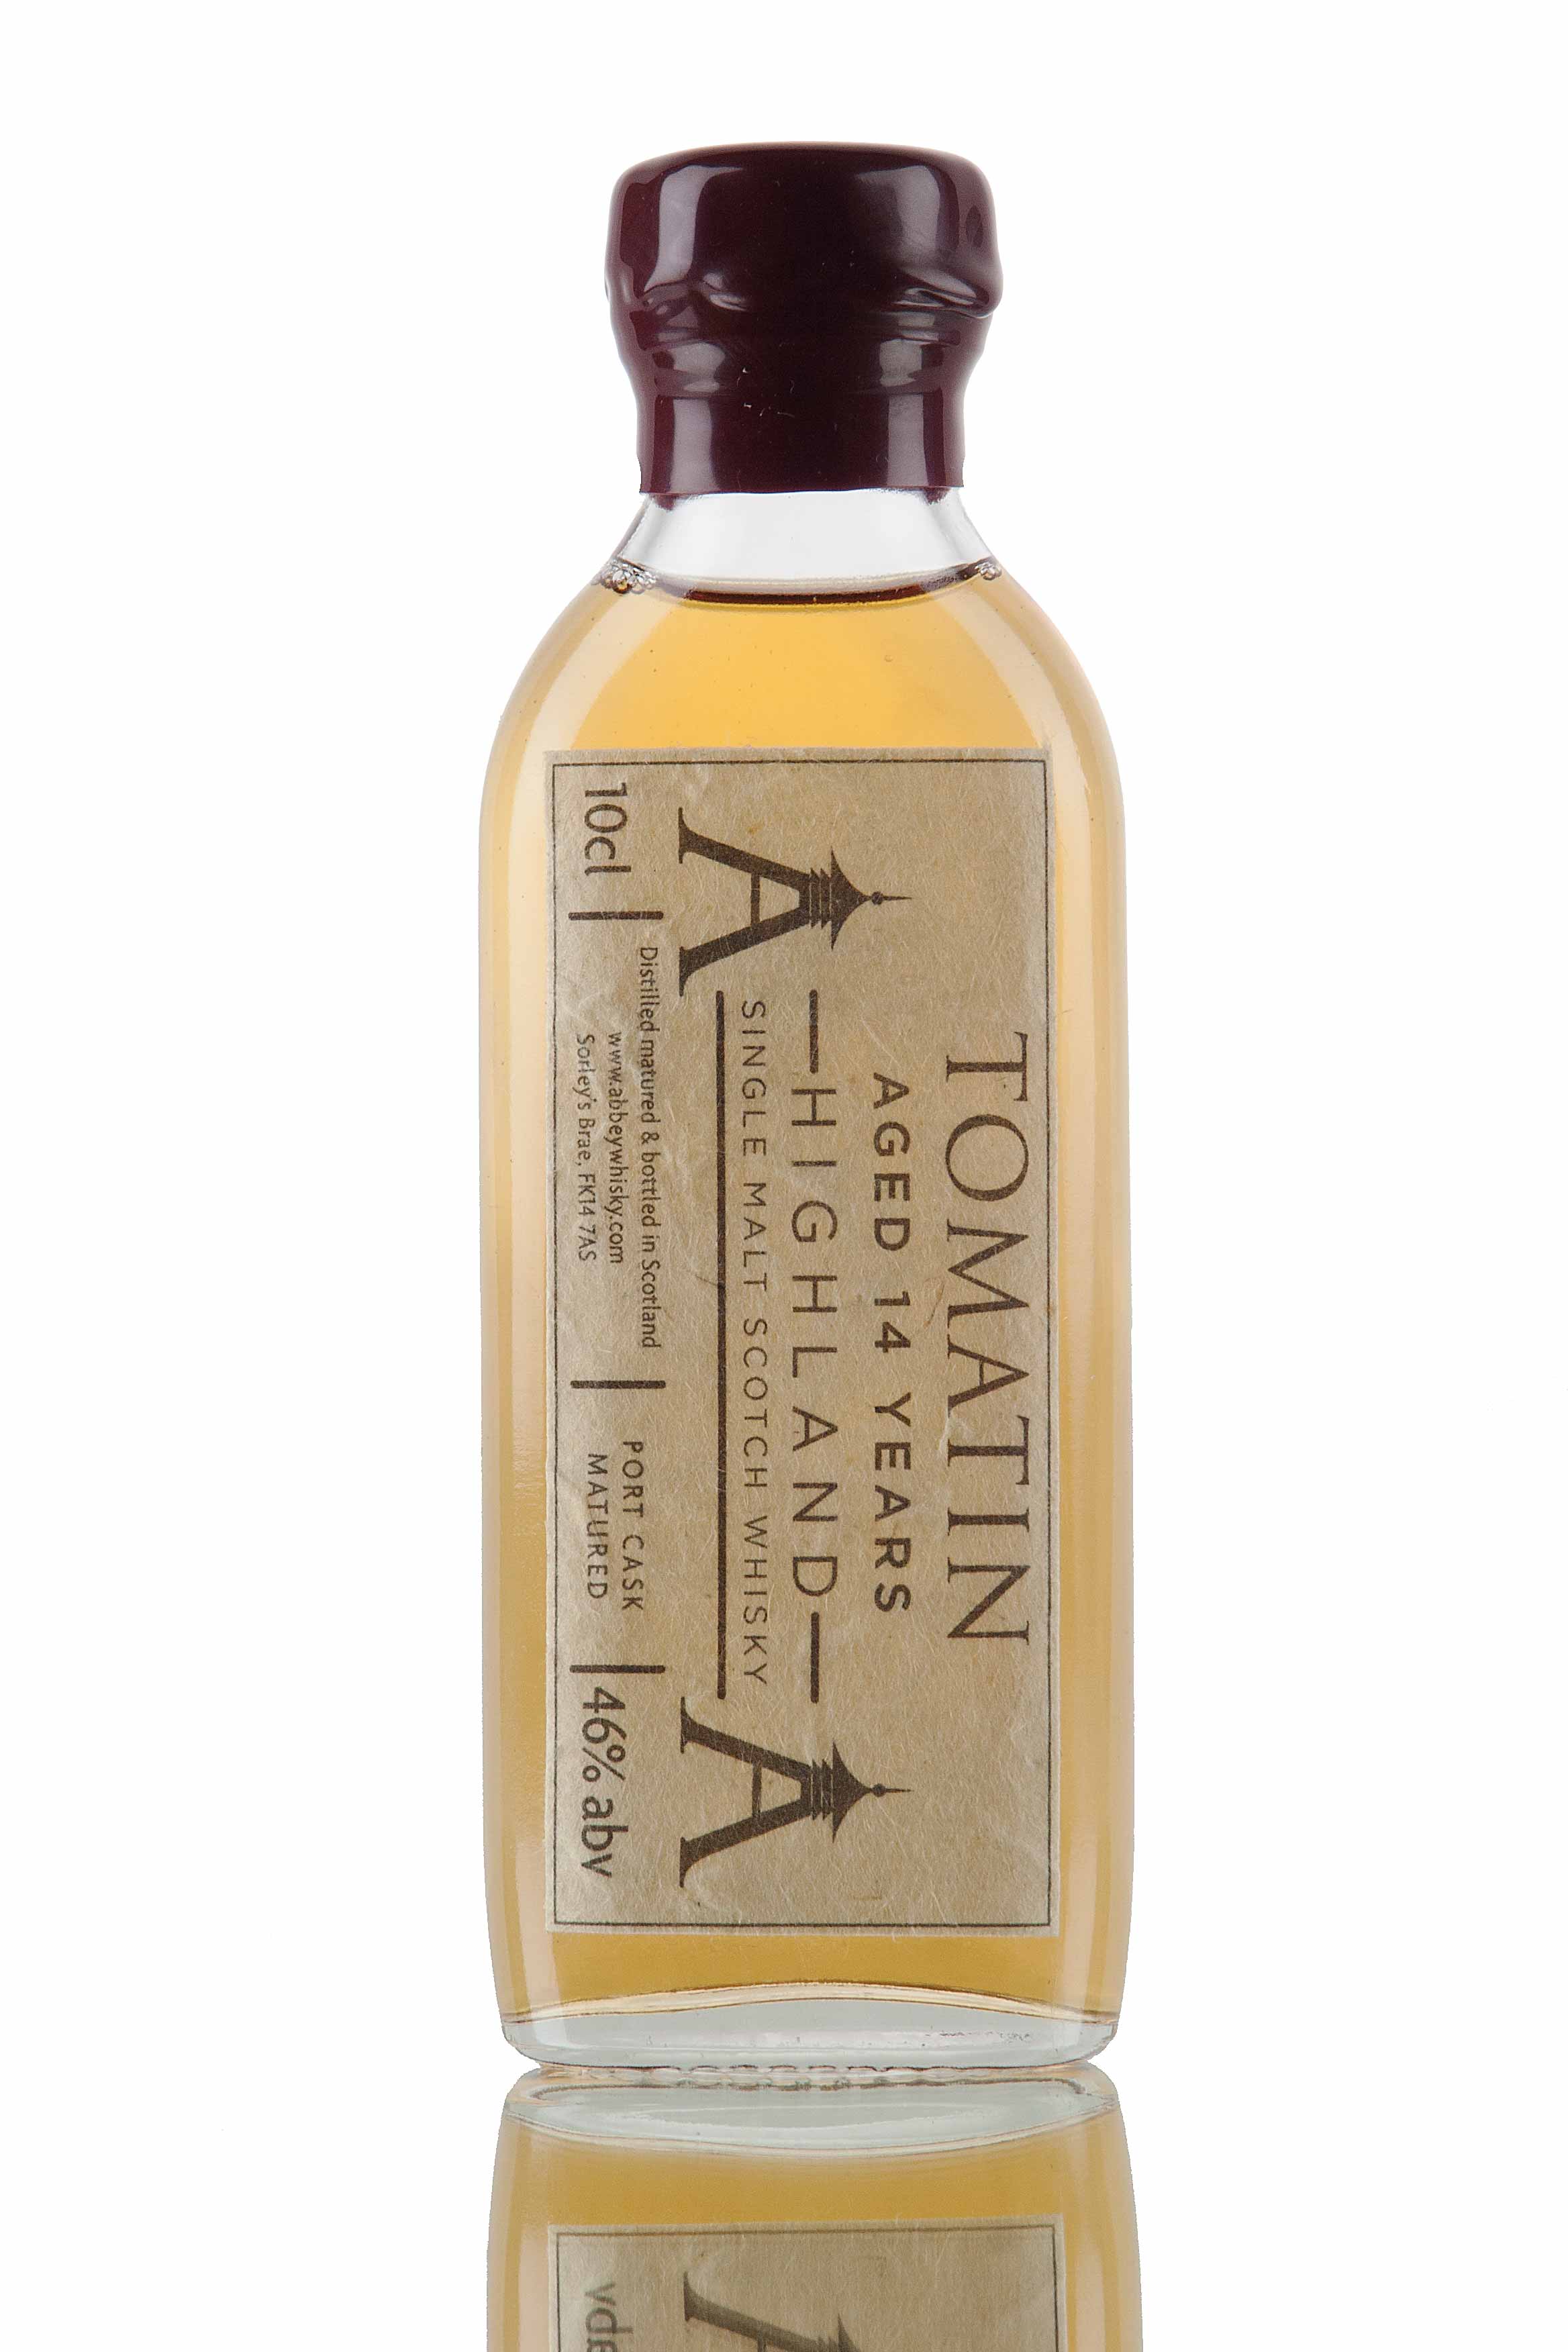 Tomatin 14 Year Old Port Wood Finish Cask / 10cl Sample